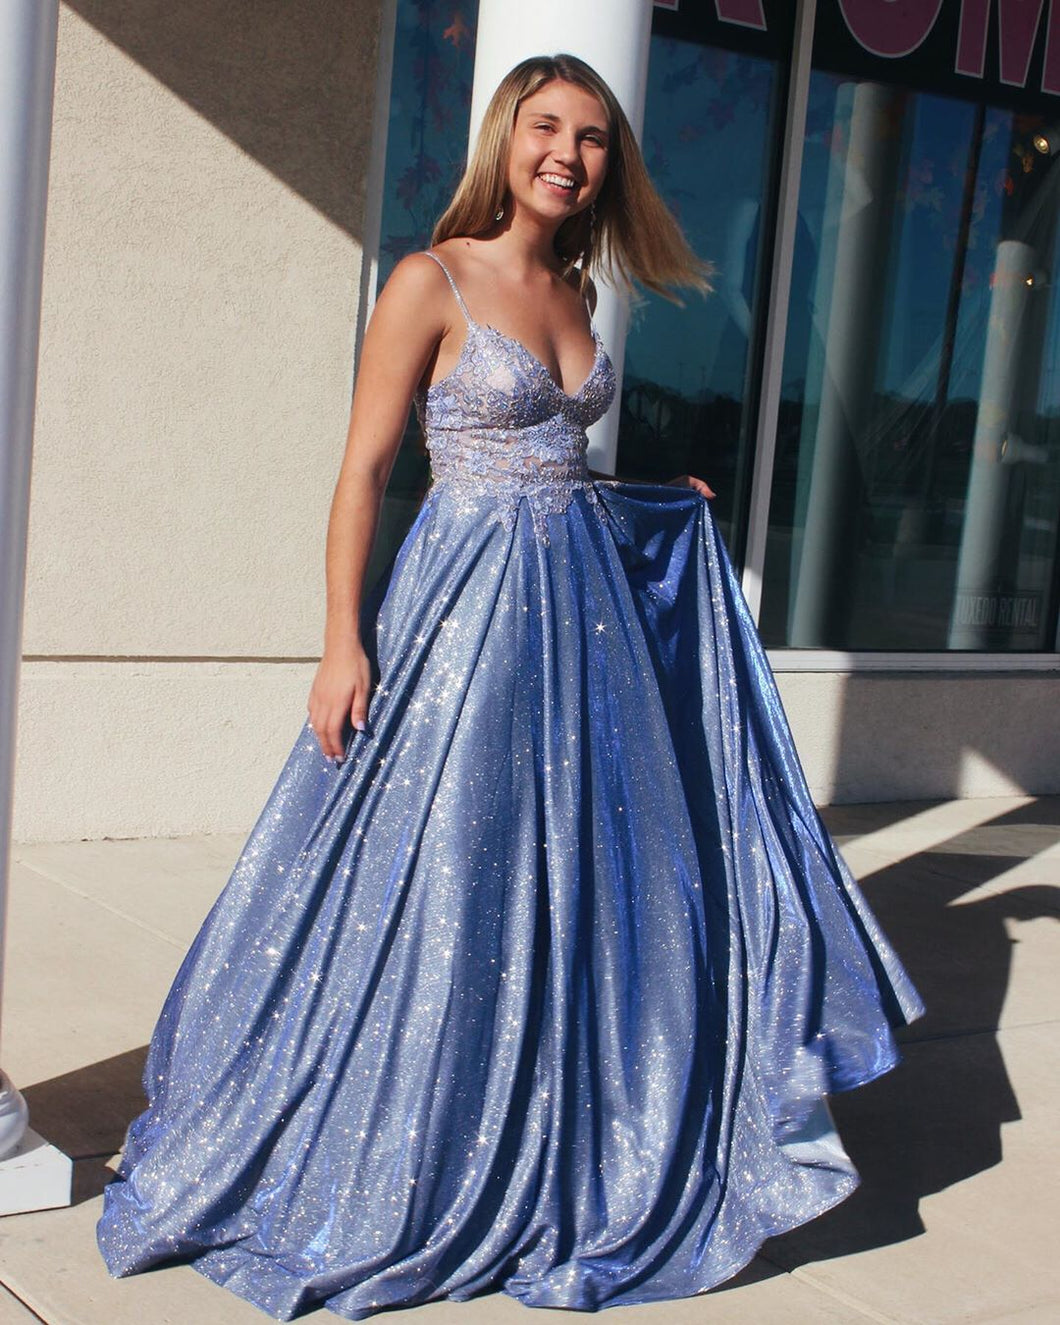 Blue Tulle Appliques A Line Long Sparkle Prom Dress With Pockets Jks86 Anna Promdress